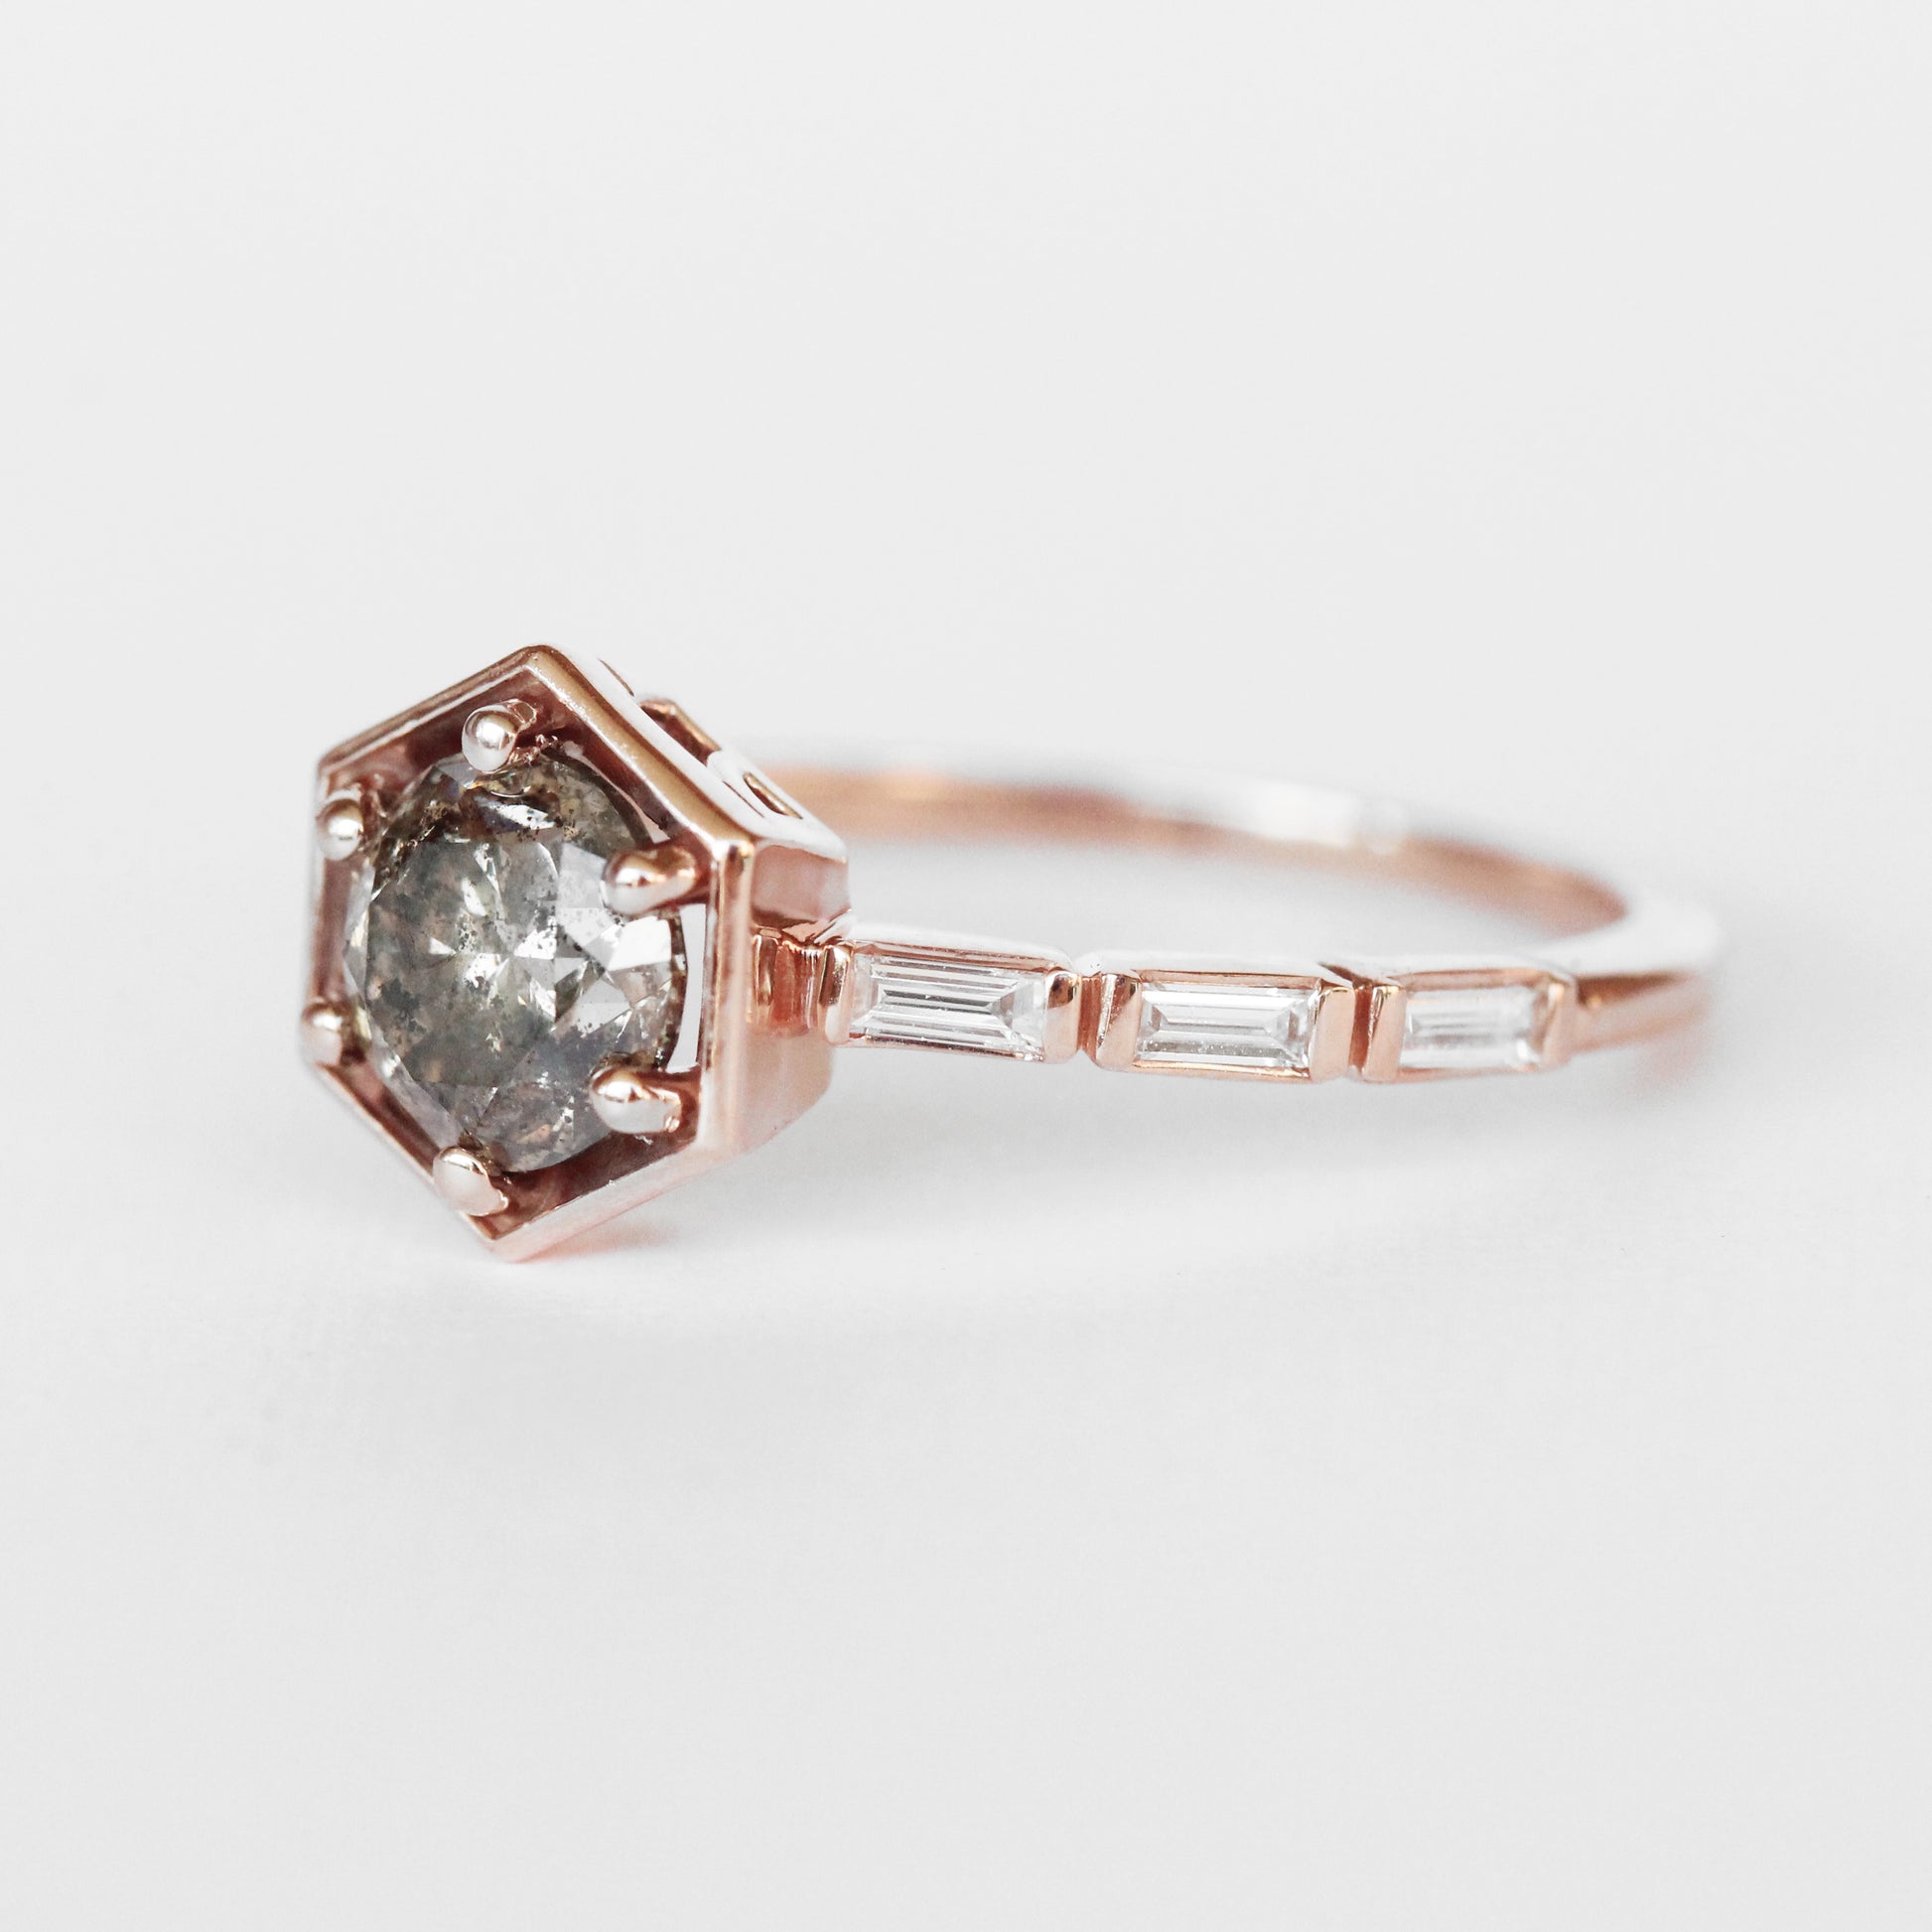 Lennen Ring with a Champagne Celestial and Diamond Accents in 10k Rose Gold - Ready to Size and Ship - Midwinter Co. Alternative Bridal Rings and Modern Fine Jewelry